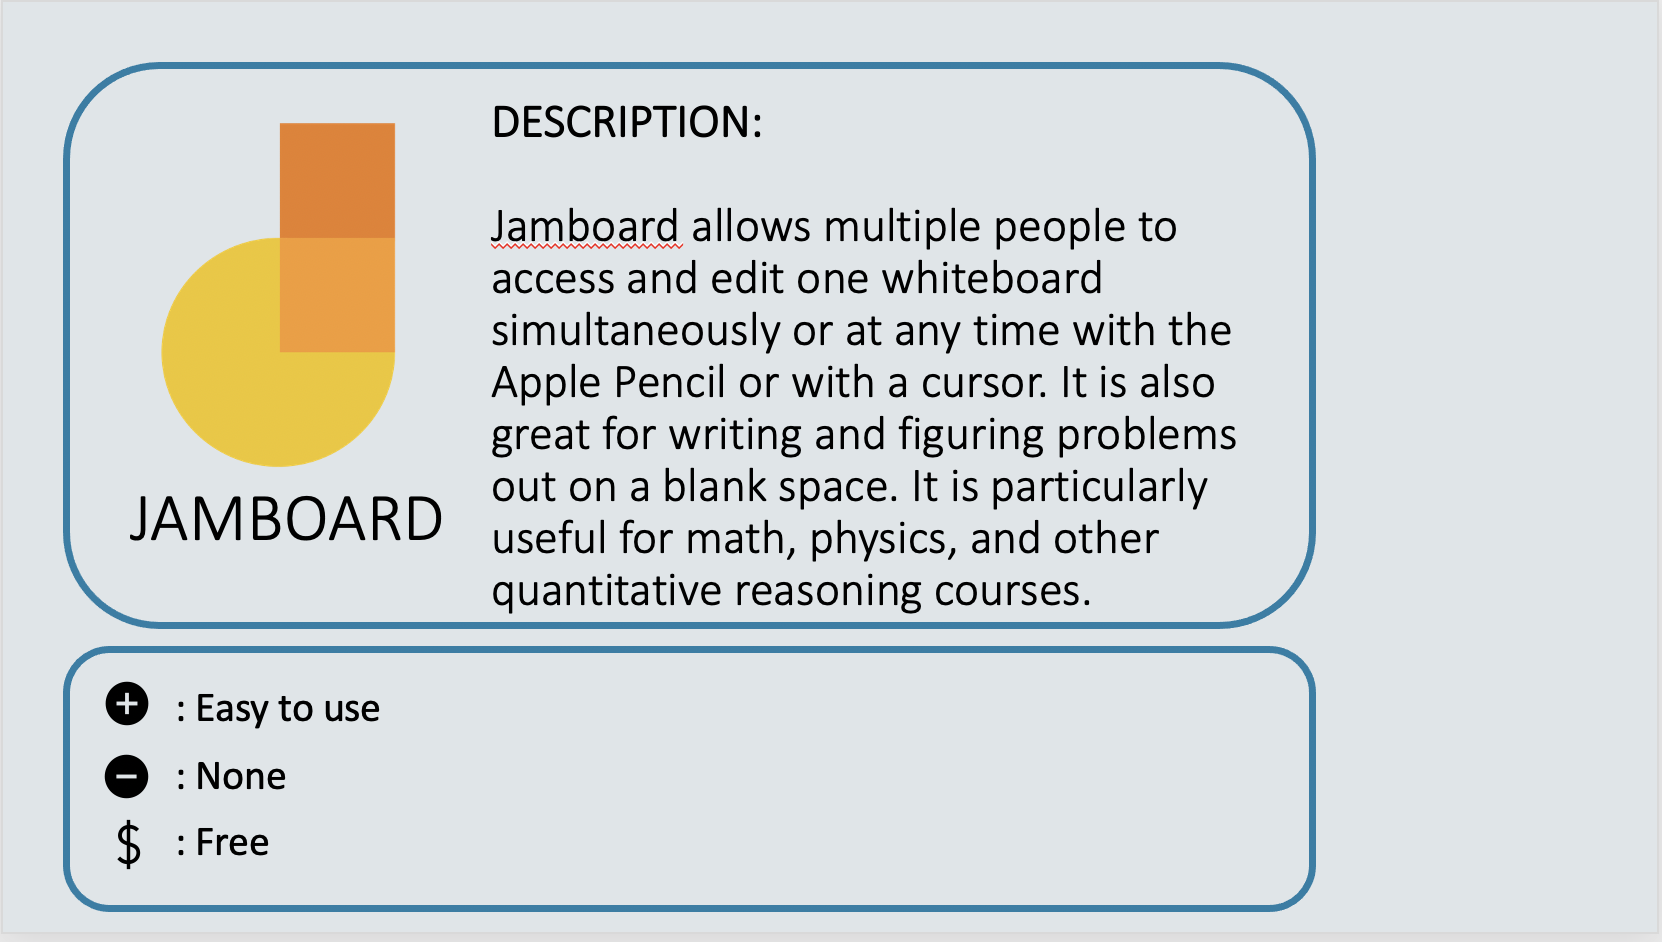 JAMBOARD - Jamboard allows multiple people to access and edit one whiteboard simultaneously or at any time with the Apple Pencil or with a cursor. It is also great for writing and figuring problems out on a blank space. It is particularly useful for math, physics, and other quantitative reasoning courses. Positive: Easy to use. Negative: None. Cost: Free.